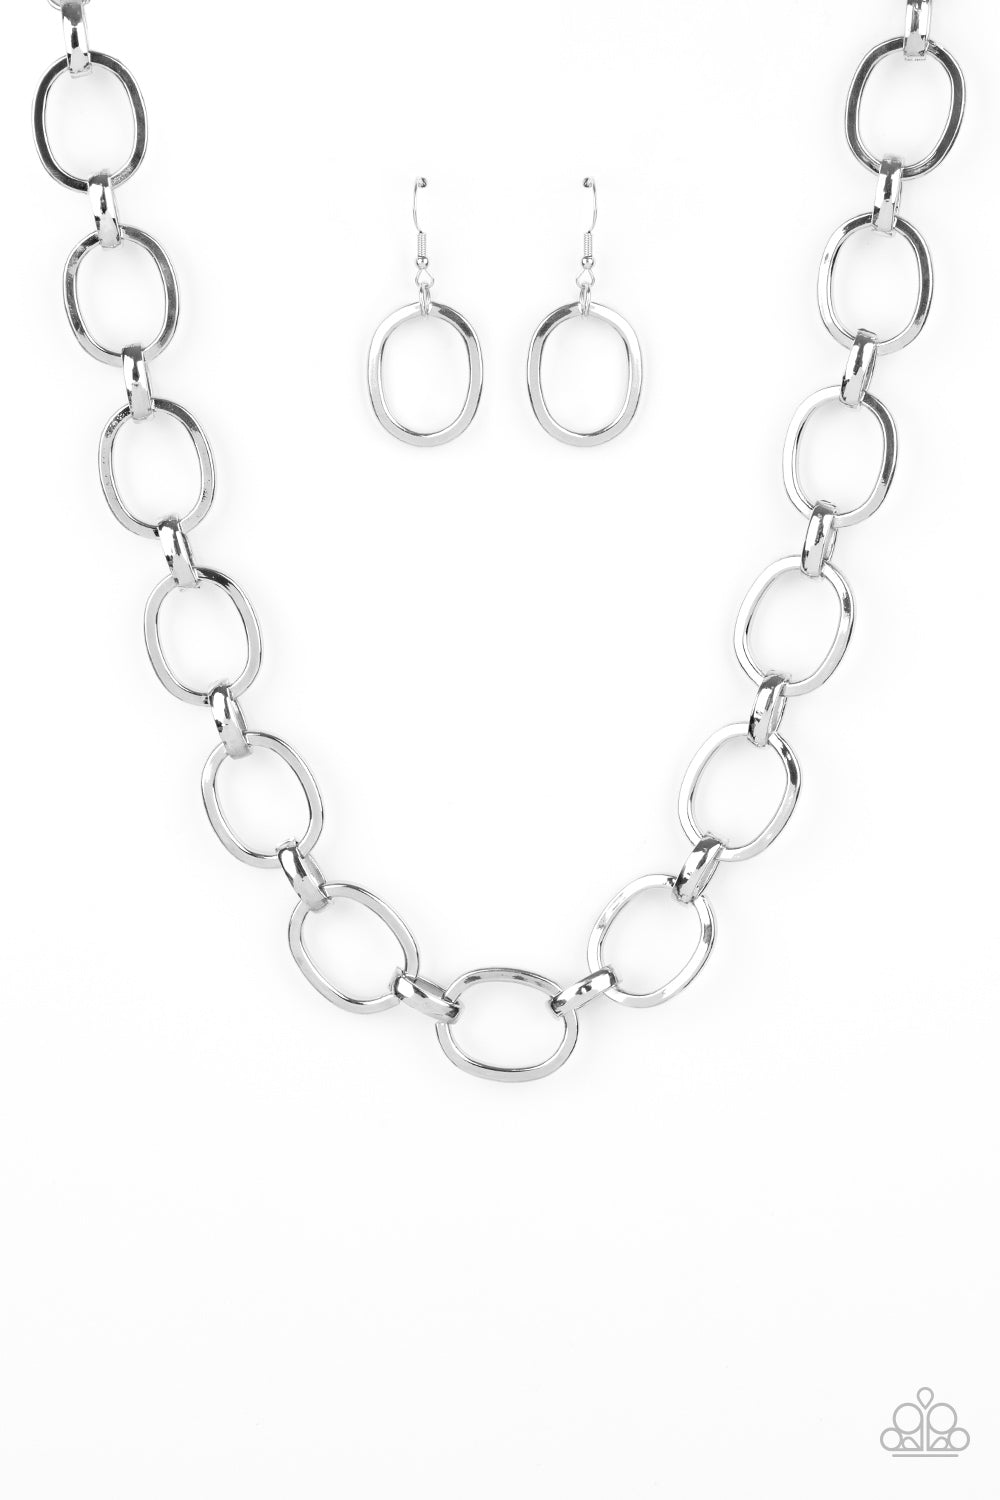 A glistening series of dramatically oversized ovals and links boldly connect below the collar